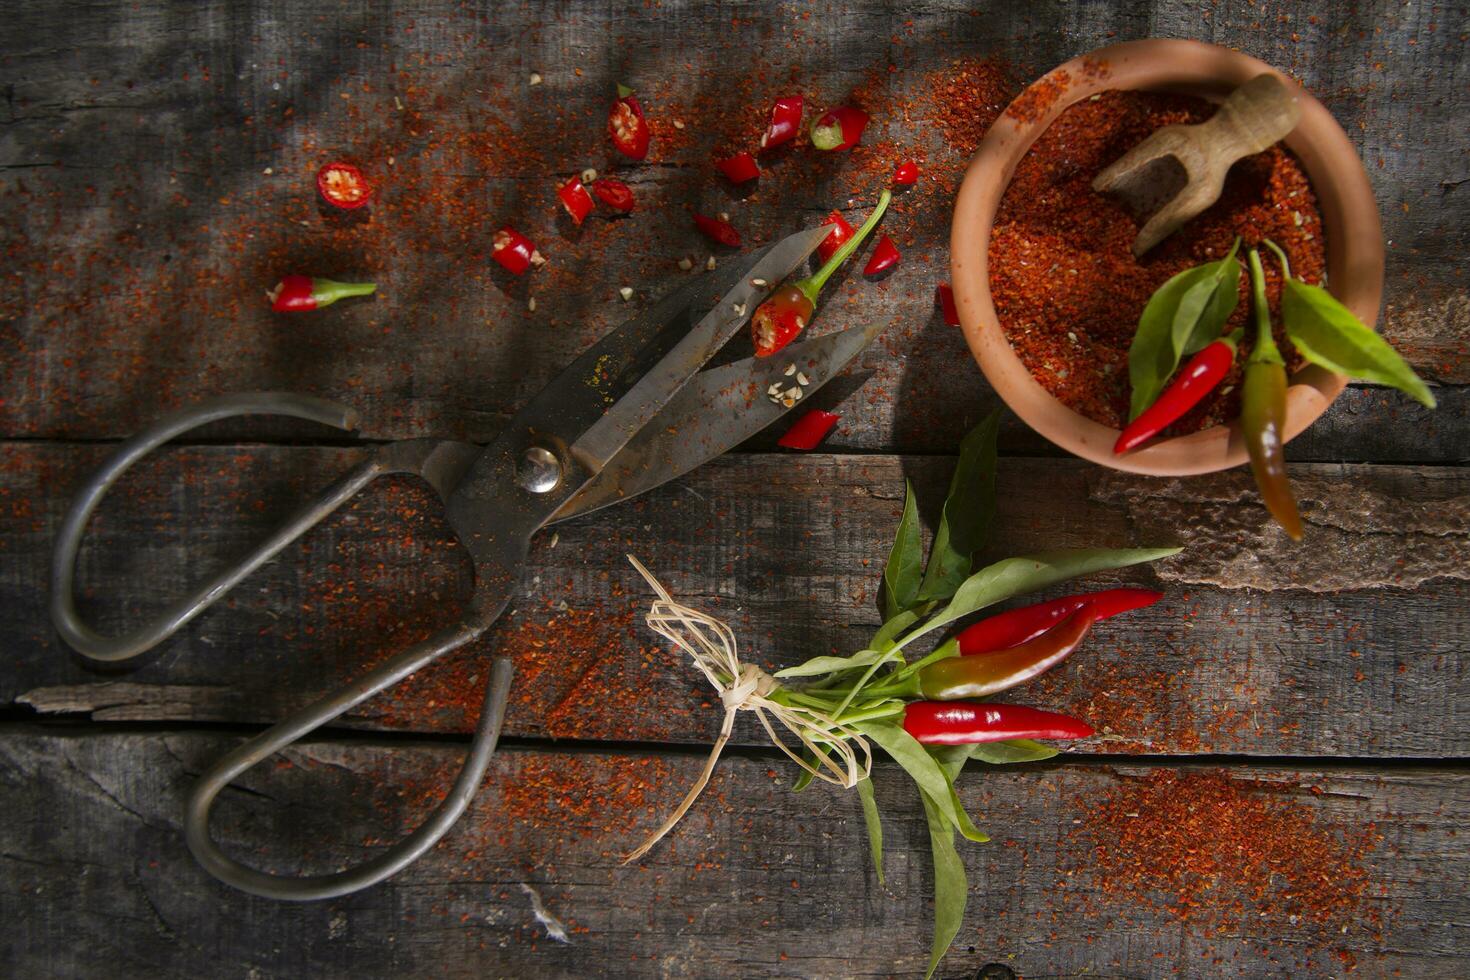 a pair of scissors and a bunch of chili peppers photo